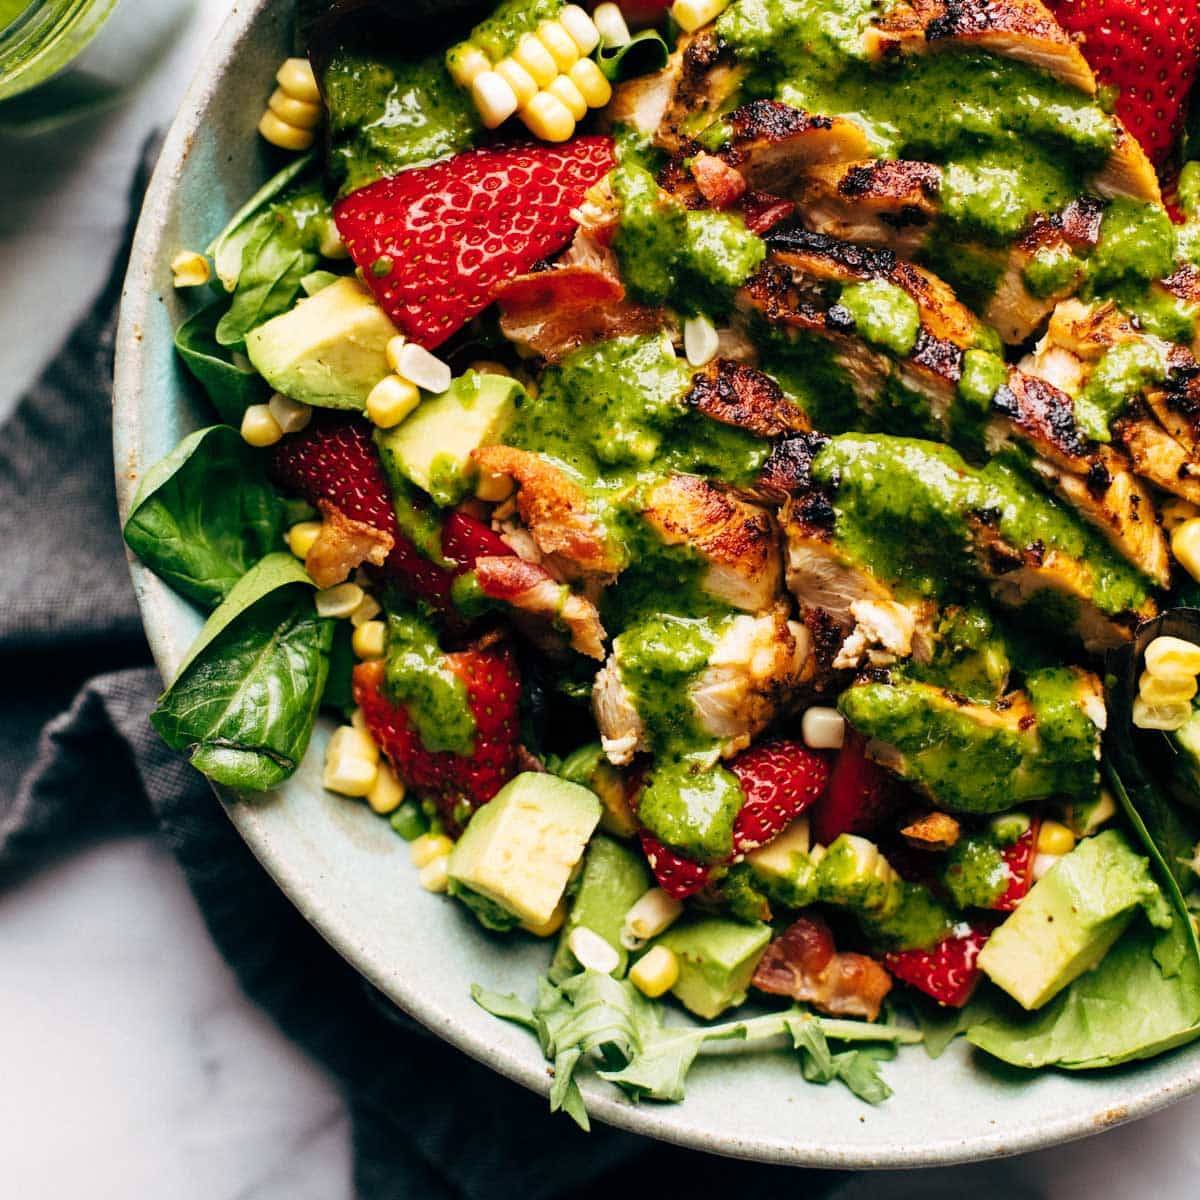 Spinach salad full of corn, strawberries, avocado, and chicken in a bowl on a table with a tablecloth.